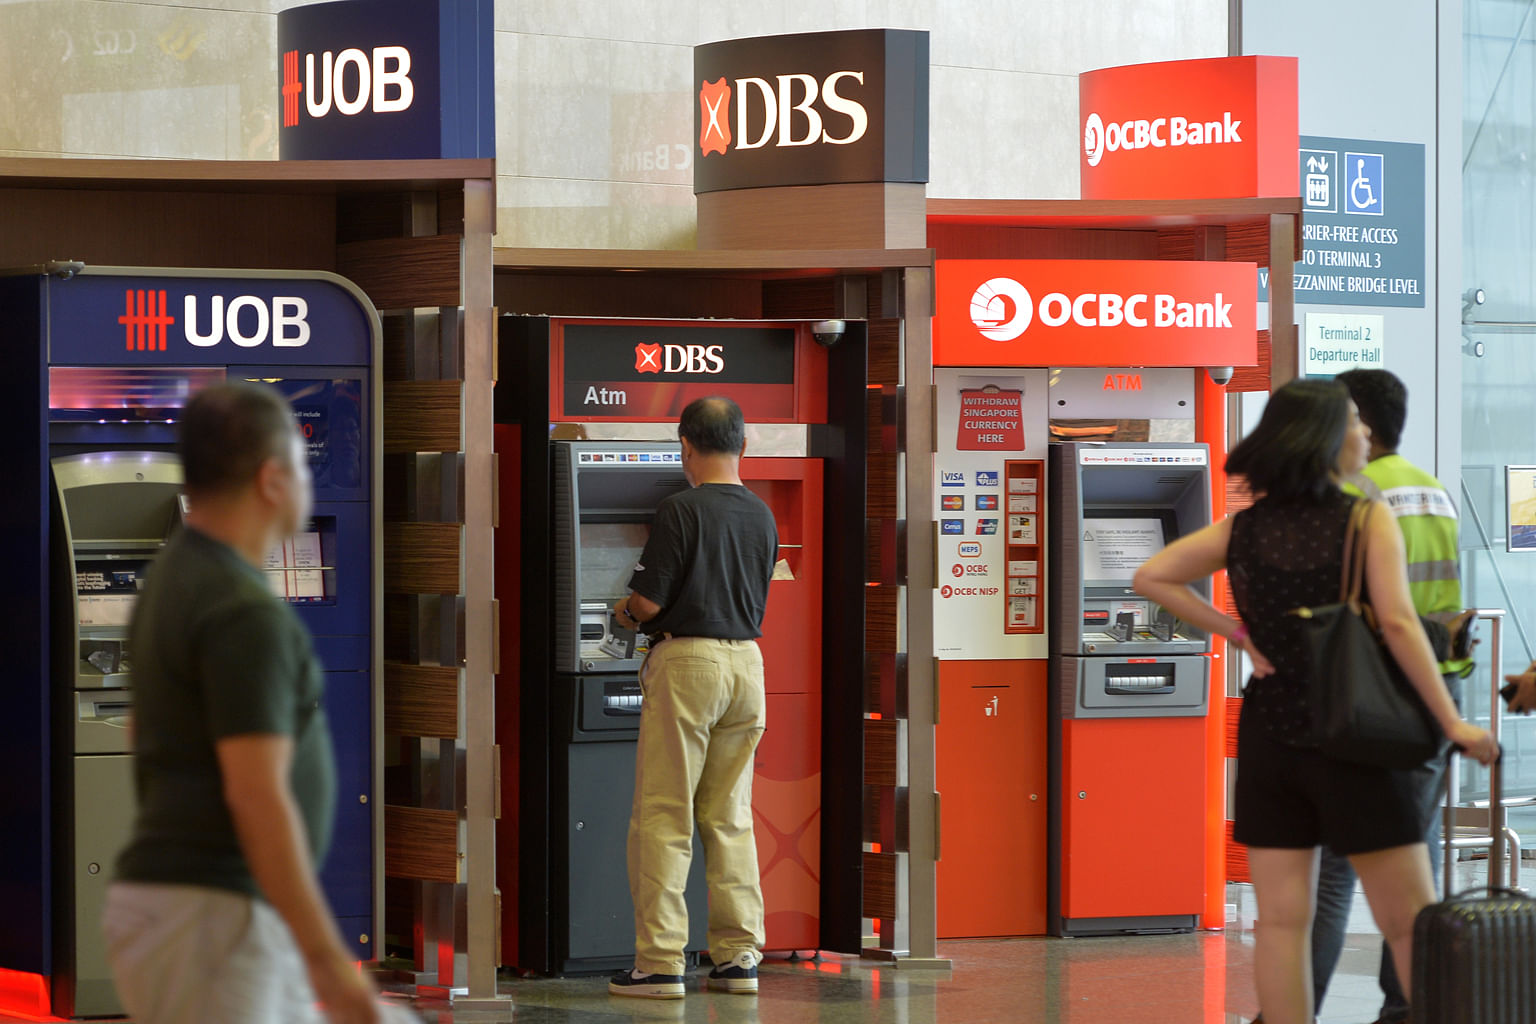 The uncertainties in the struggling oil and gas sector aside, loans growth and margin improvement will be the factors DBS, OCBC and UOB are counting on for growth this year.